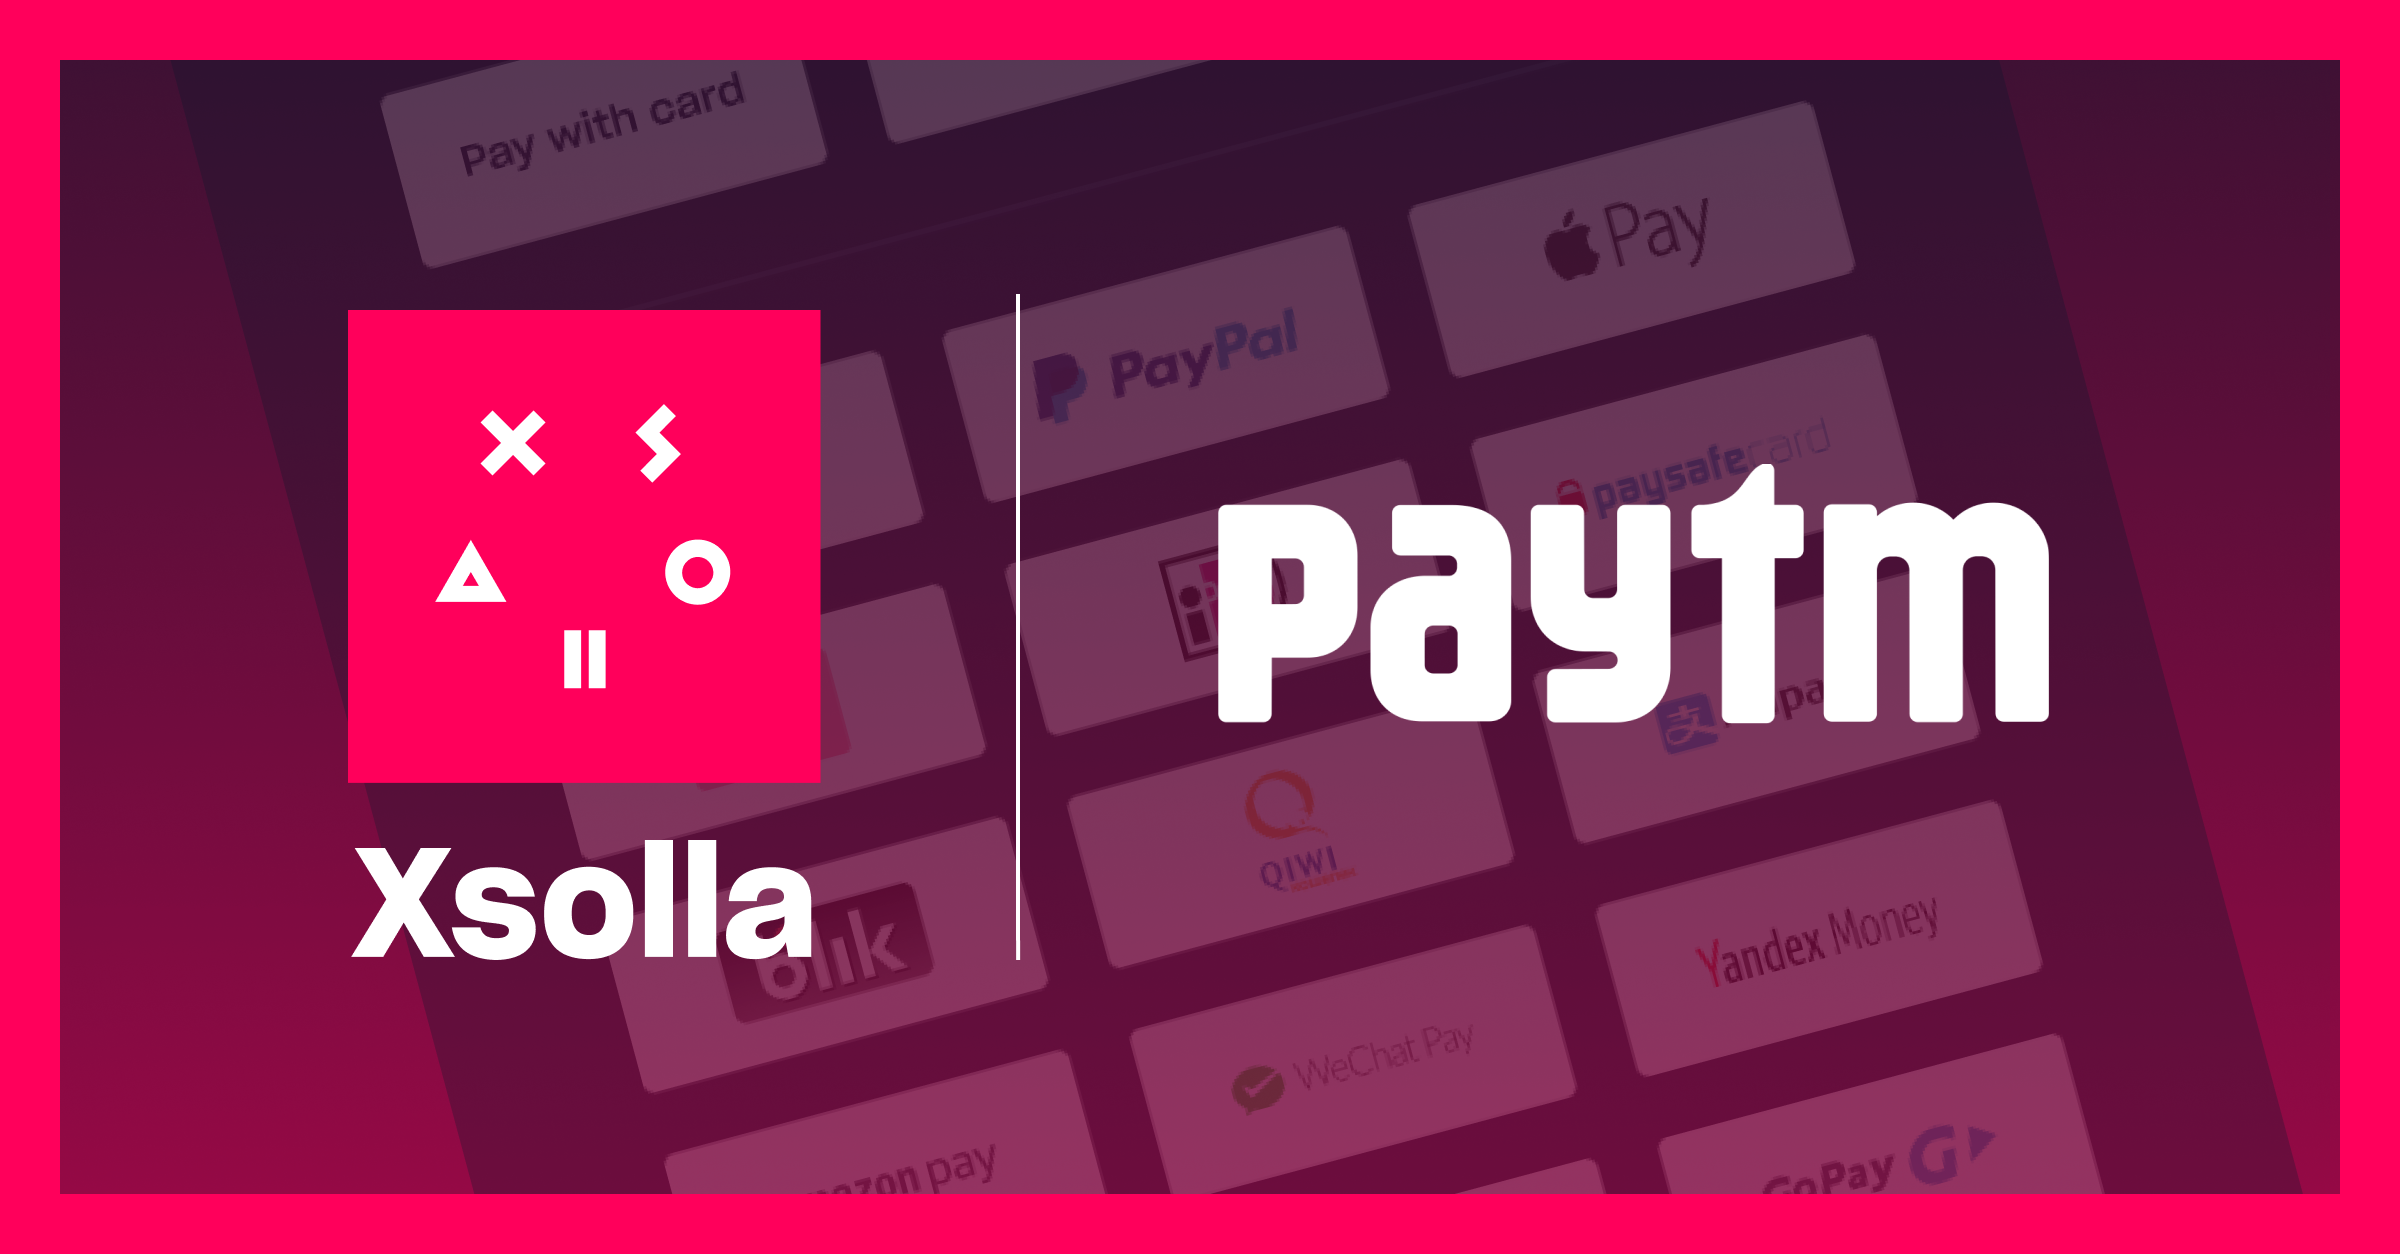 Xsolla and Paytm